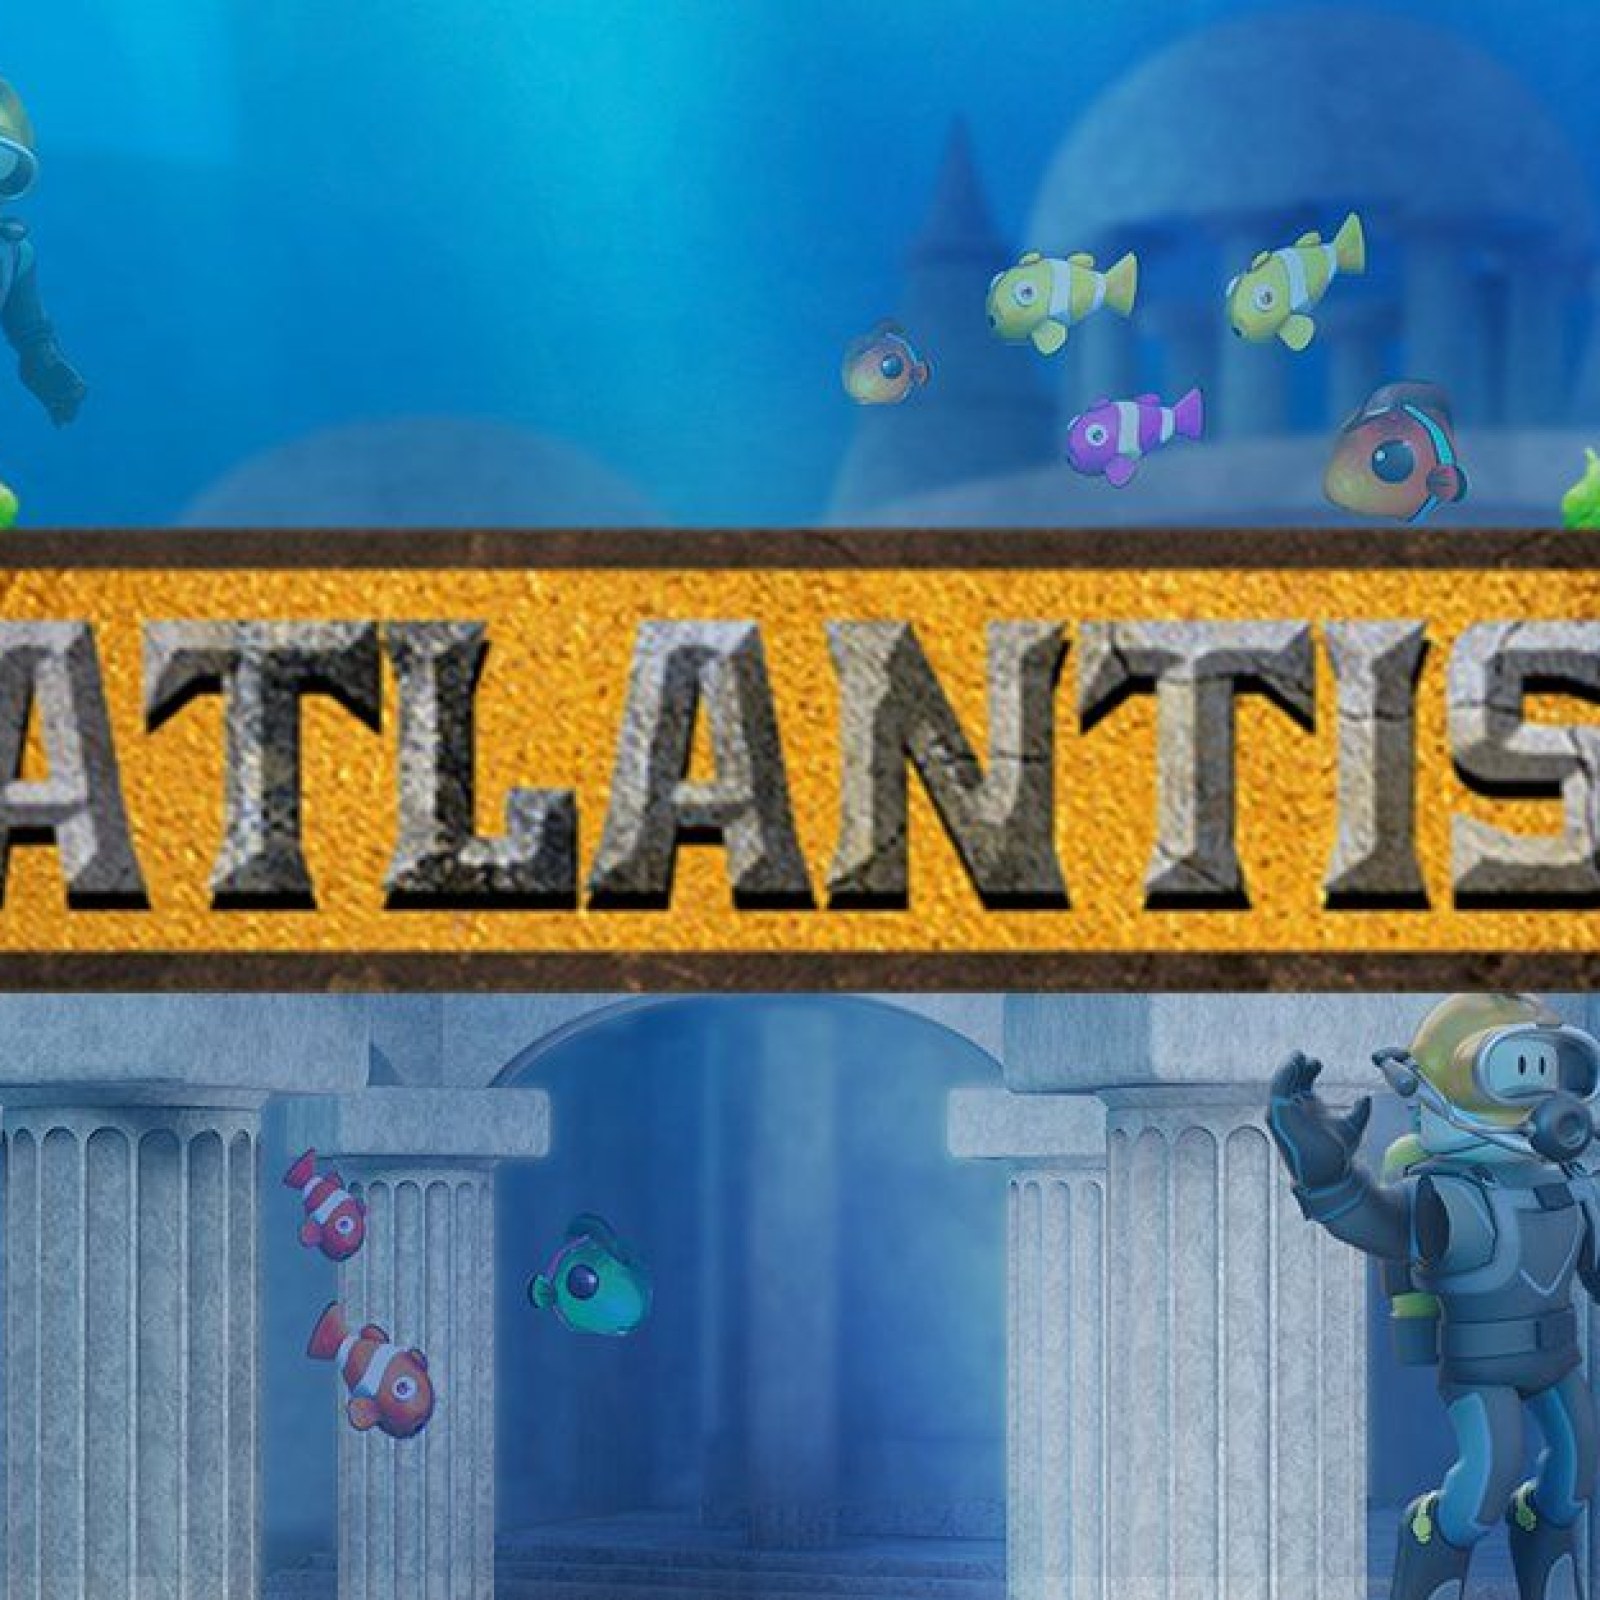 Roblox Atlantis Event Tradelands Guide How To Get Diver S Helmet And Aquatic Headphones Walkthrough - updated how to trade on roblox complete guide 2018